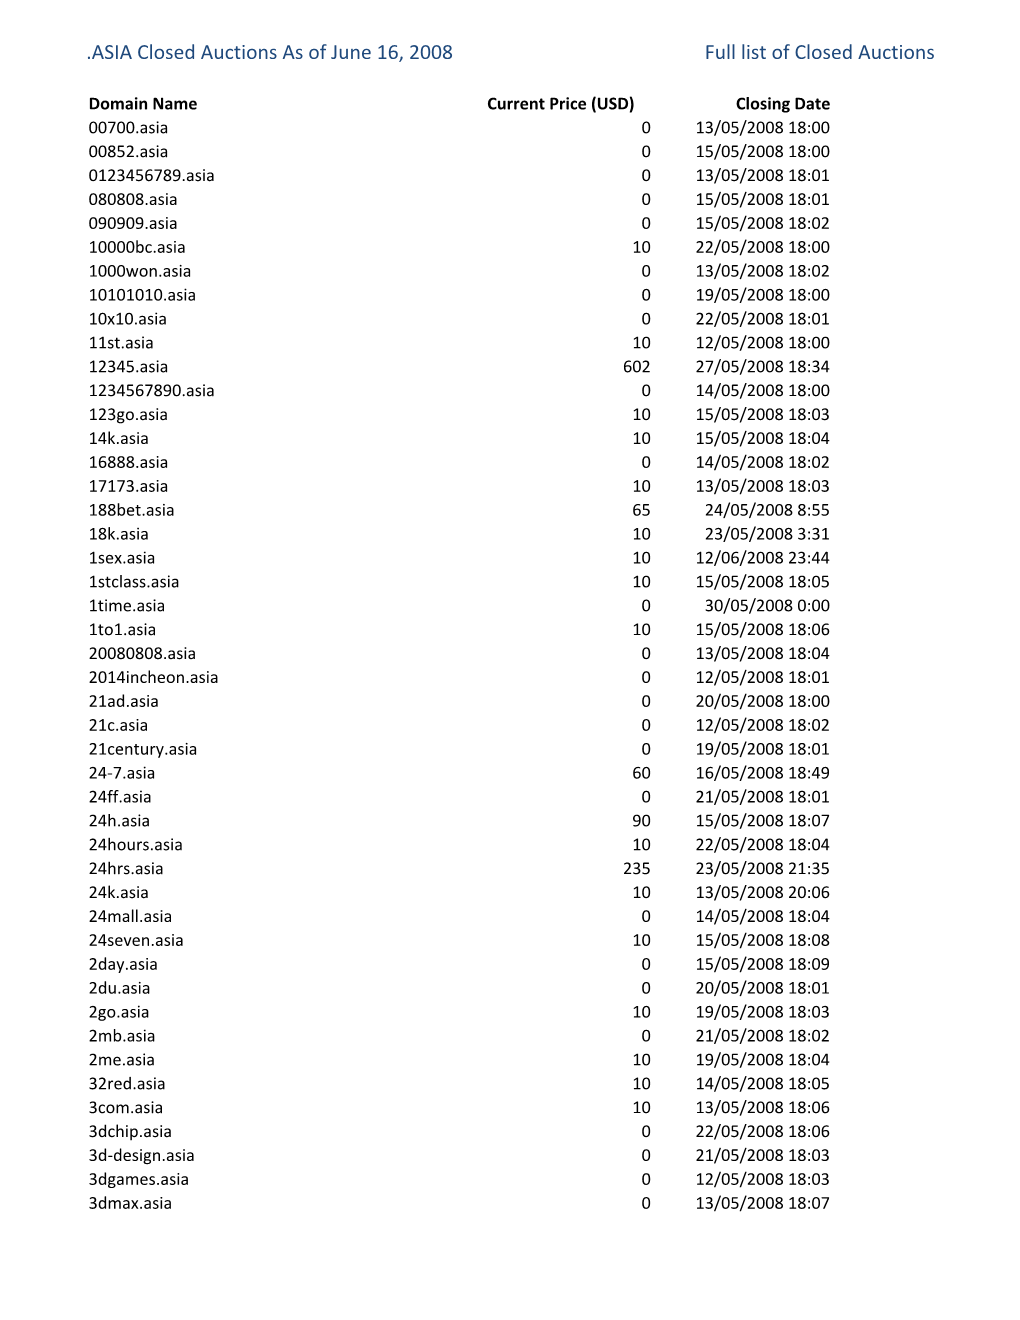 ASIA Closed Auctions As of June 16, 2008 Full List of Closed Auctions